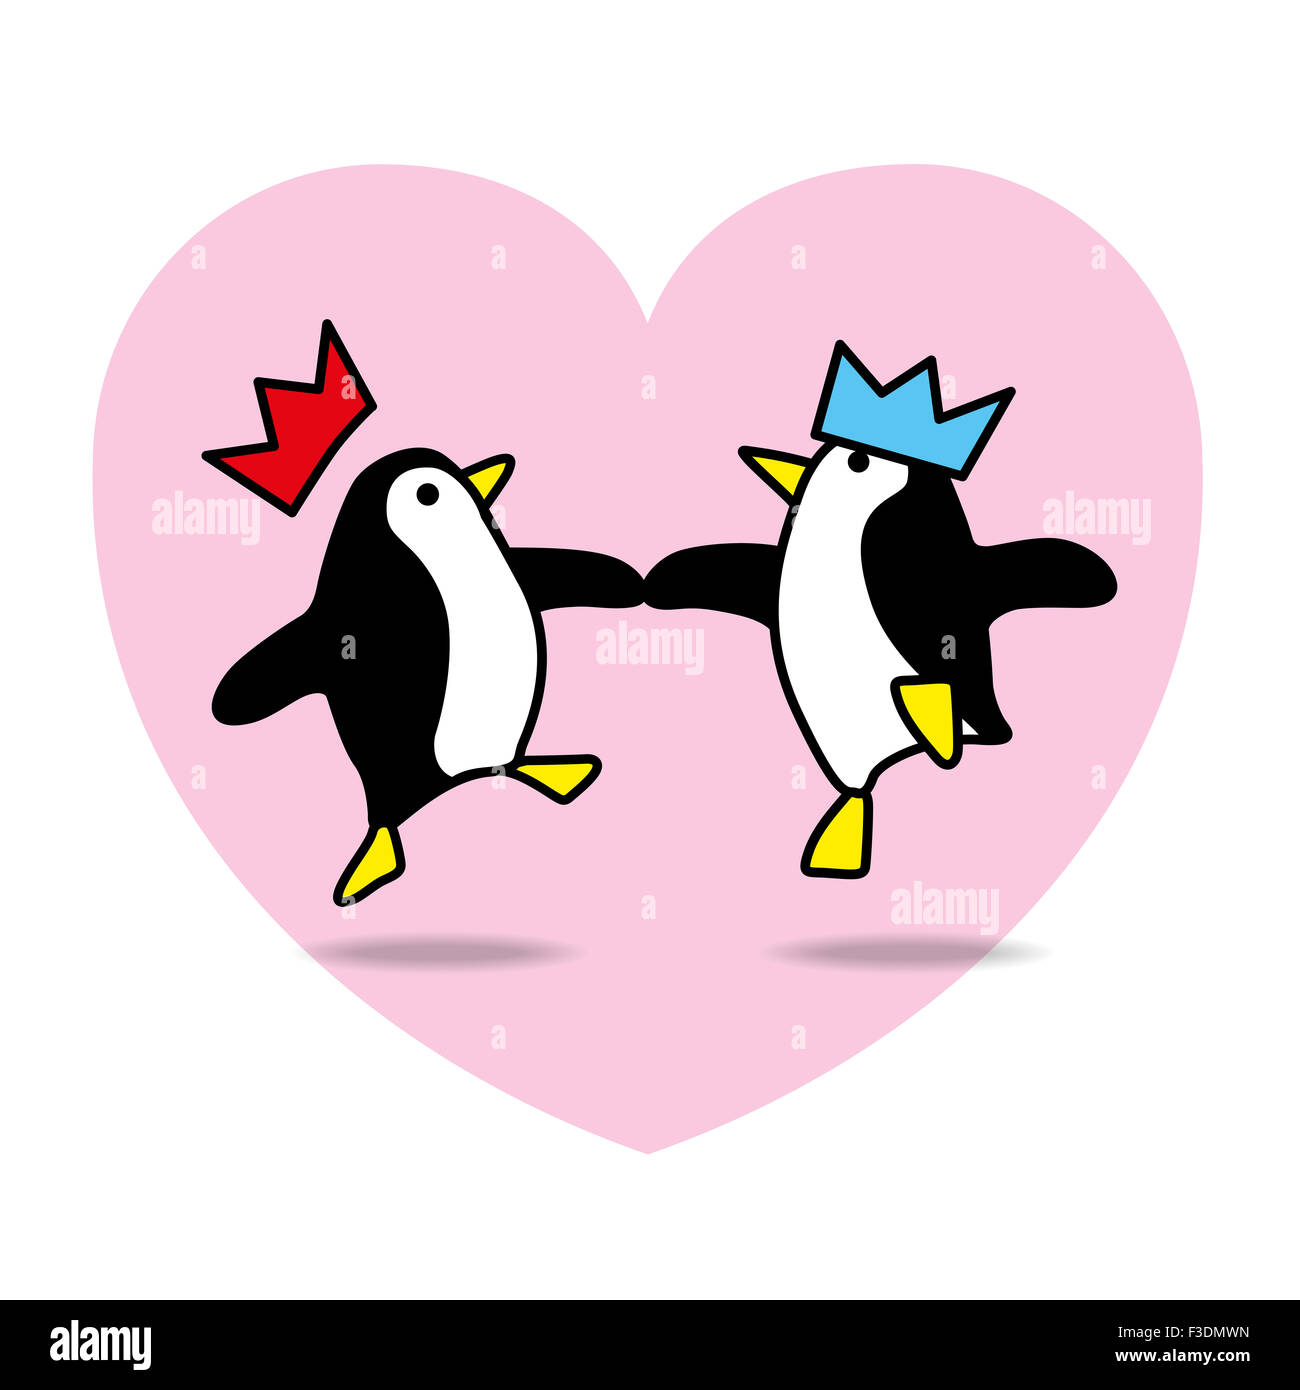 Two Happy Santa Penguins with Paper Hats Dancing with Pink Heart on White Background Stock Photo